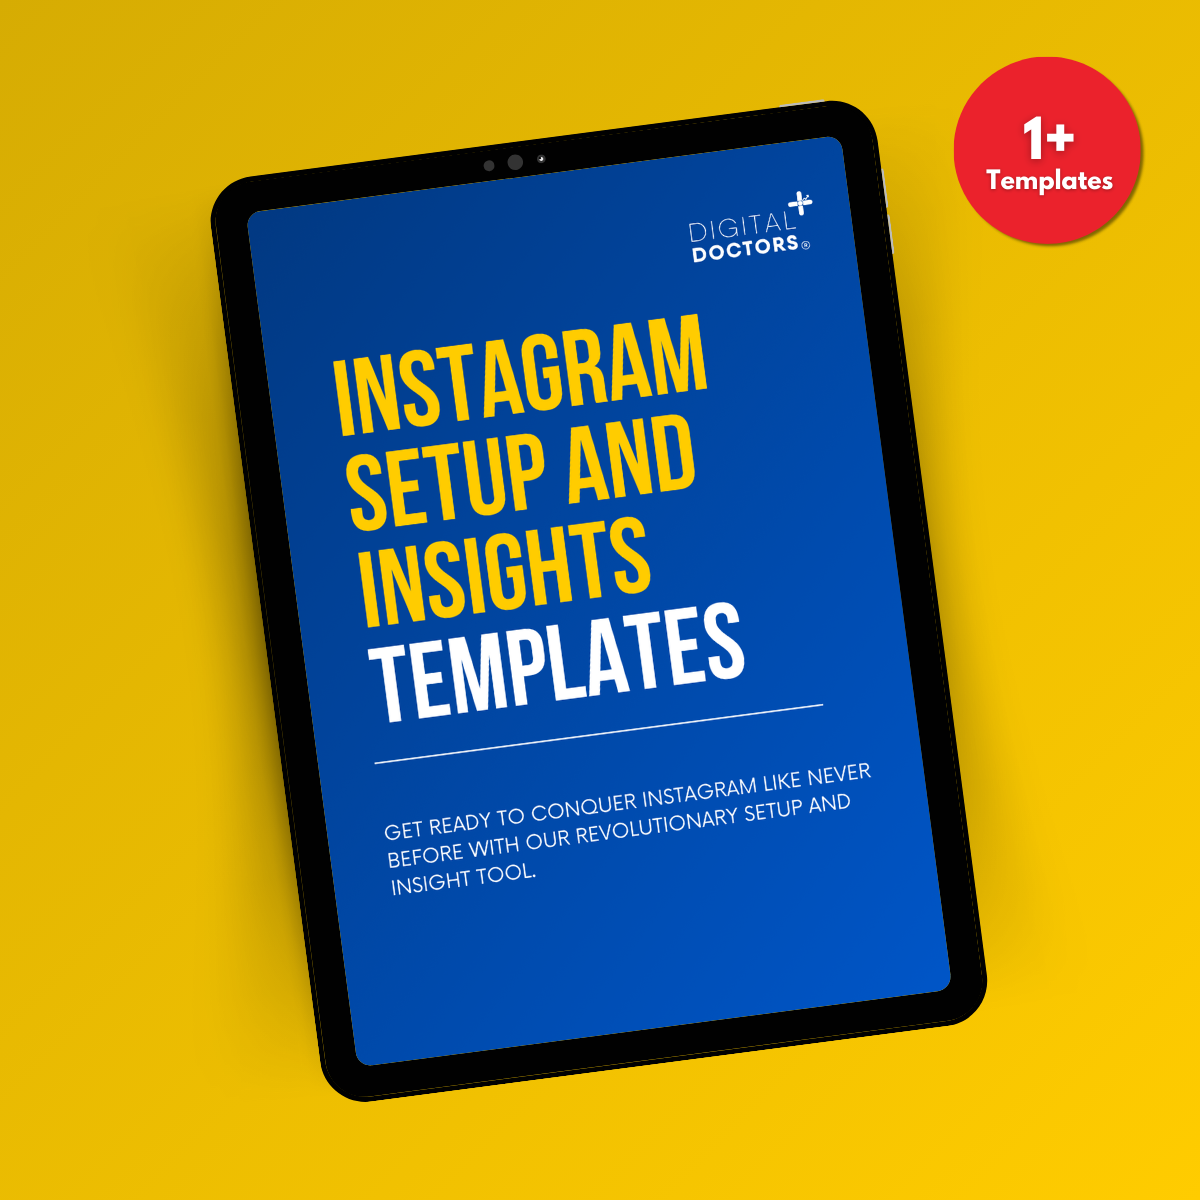 Instagram Setup and Insights Templates